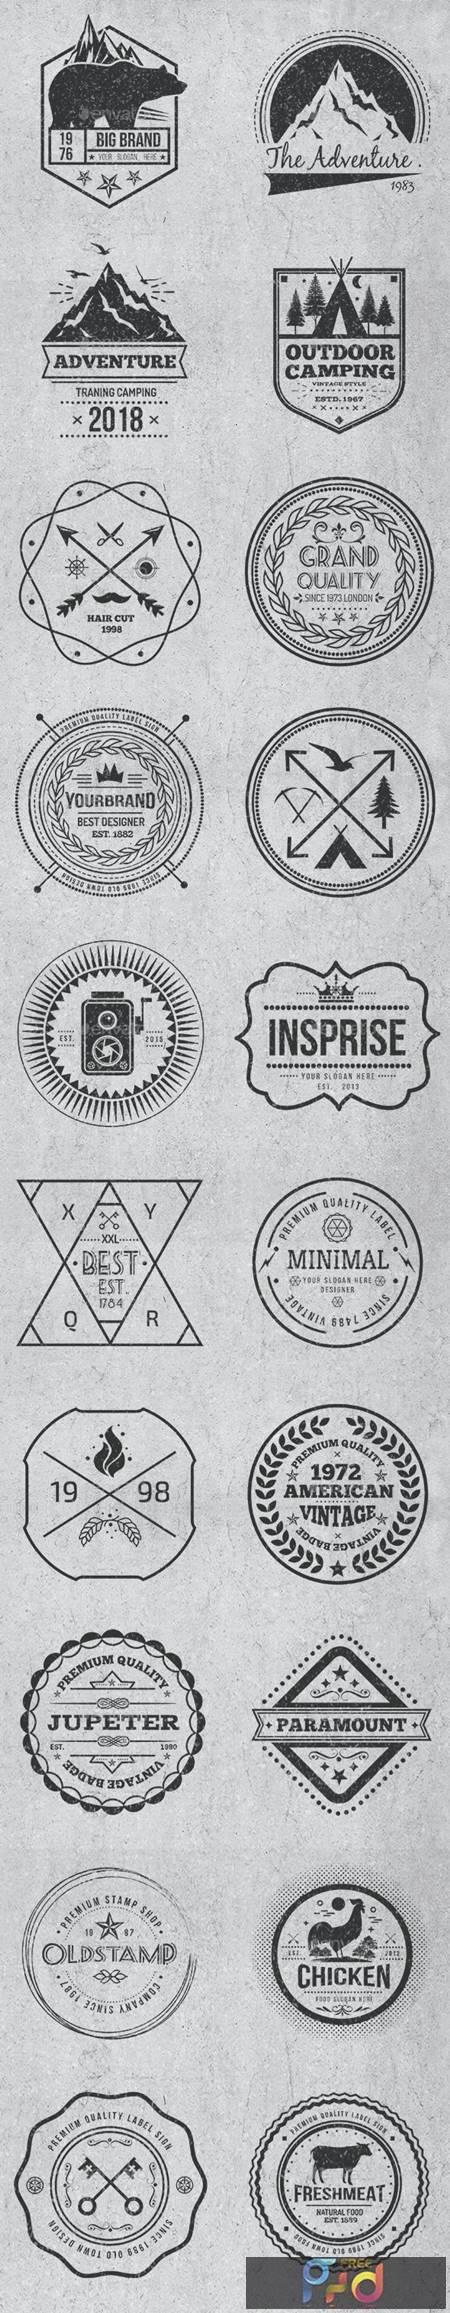 Vintage Style Badges and Logos Vol 4